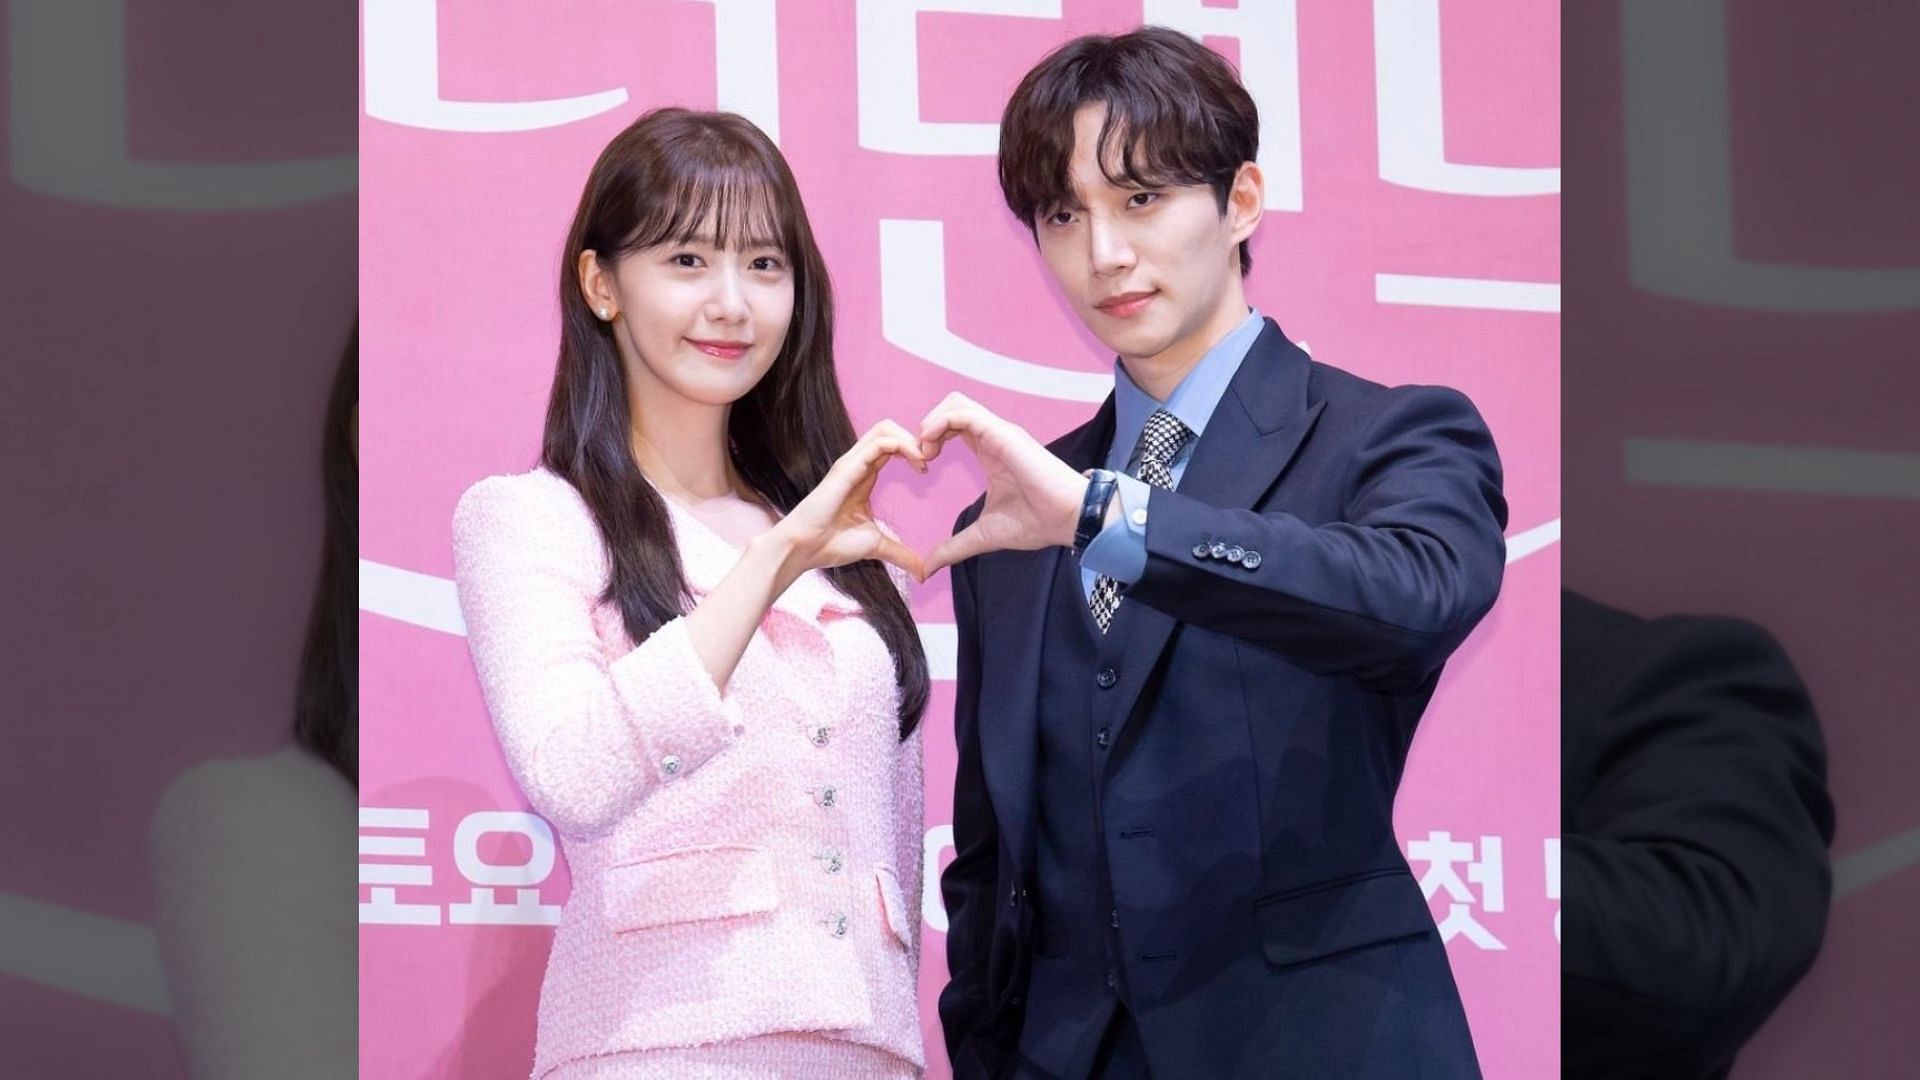 Rumored couple YoonA and Junho make a heart together at a press conference.